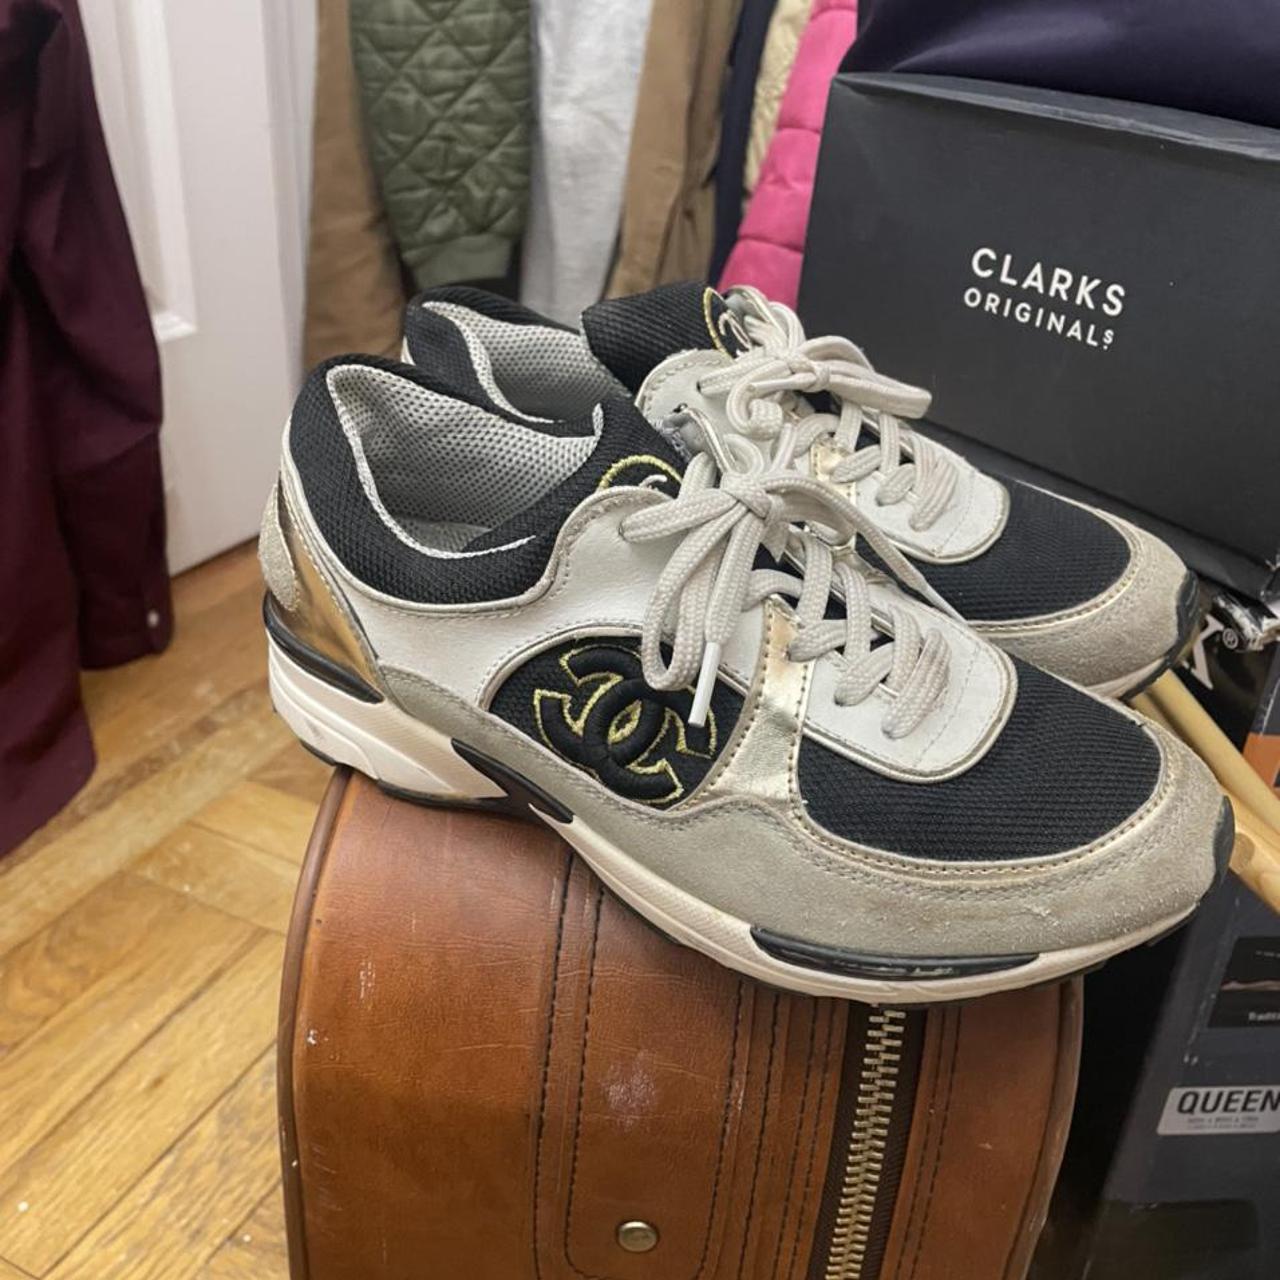 Lightly worn authentic Chanel sneakers, light cool